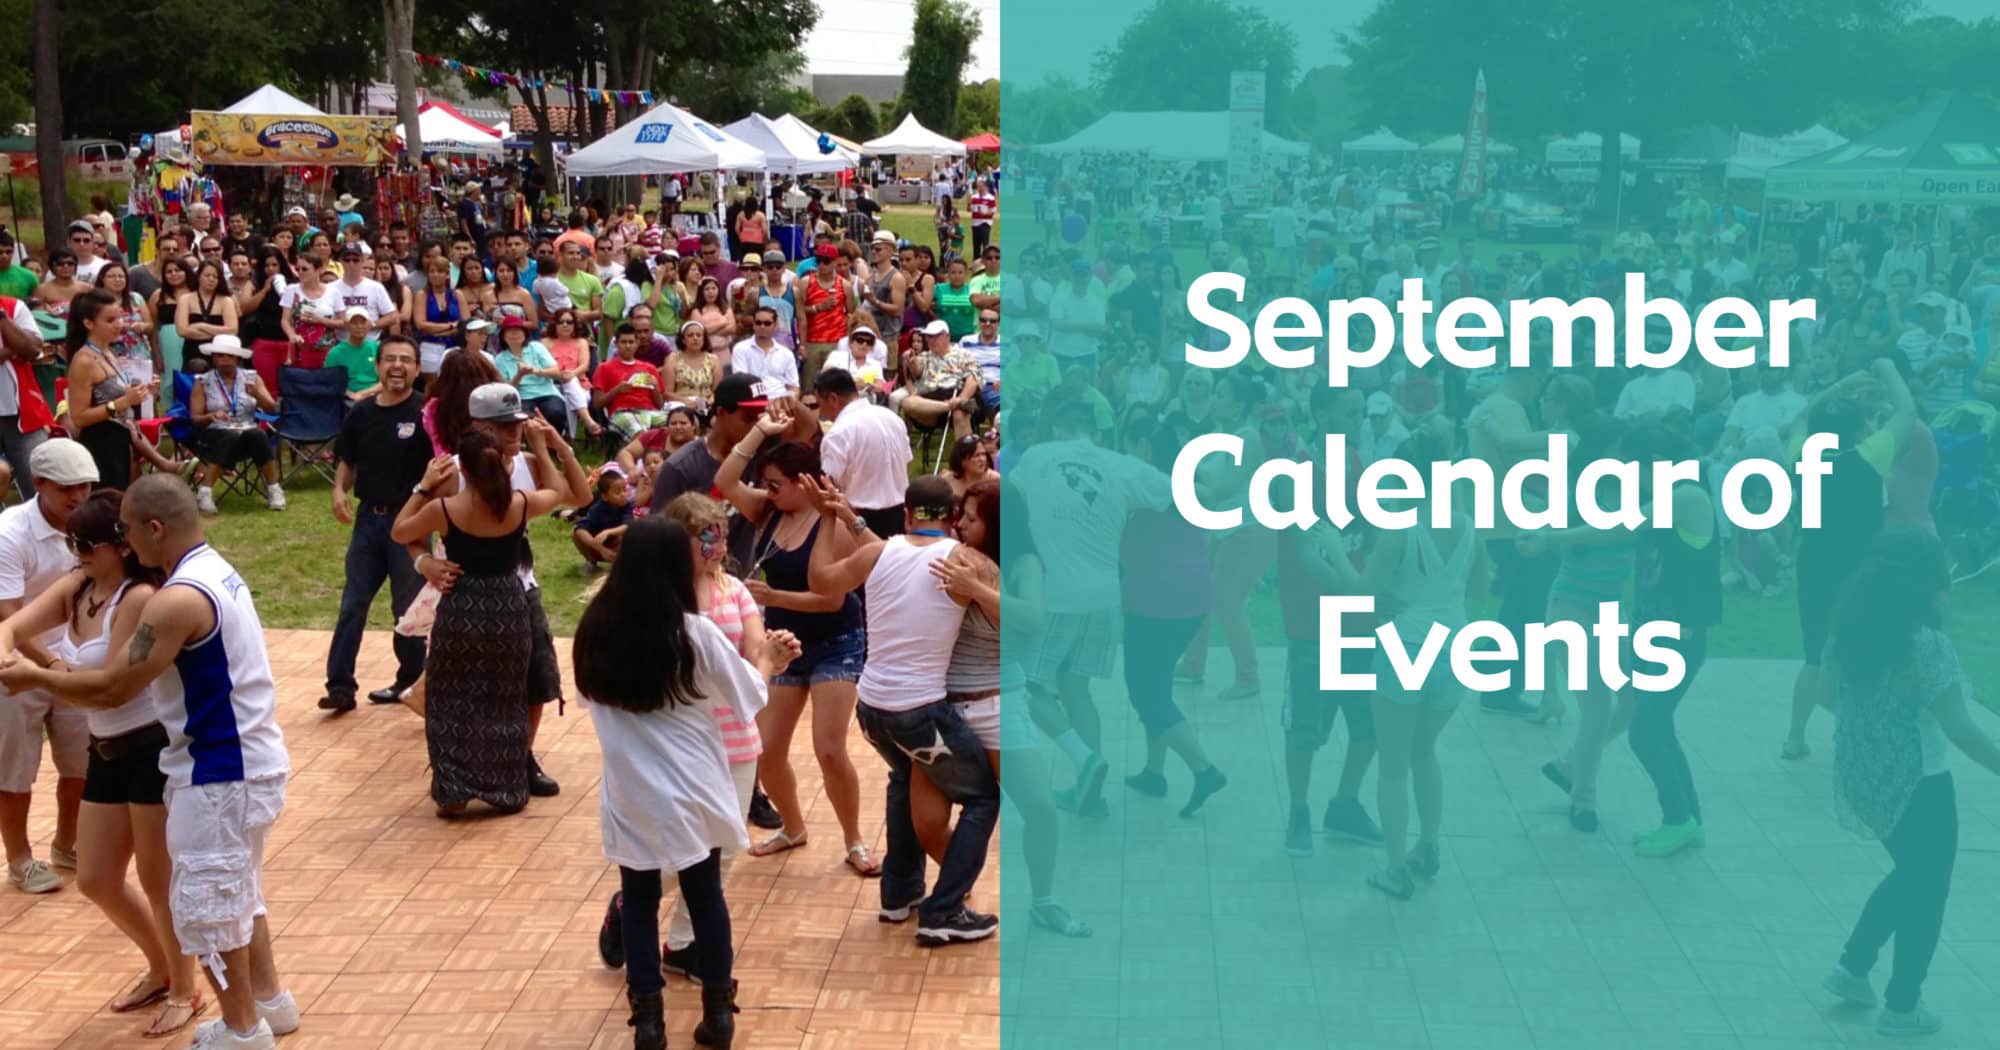 September Calendar of Events in Bluffton and Hilton Head Island